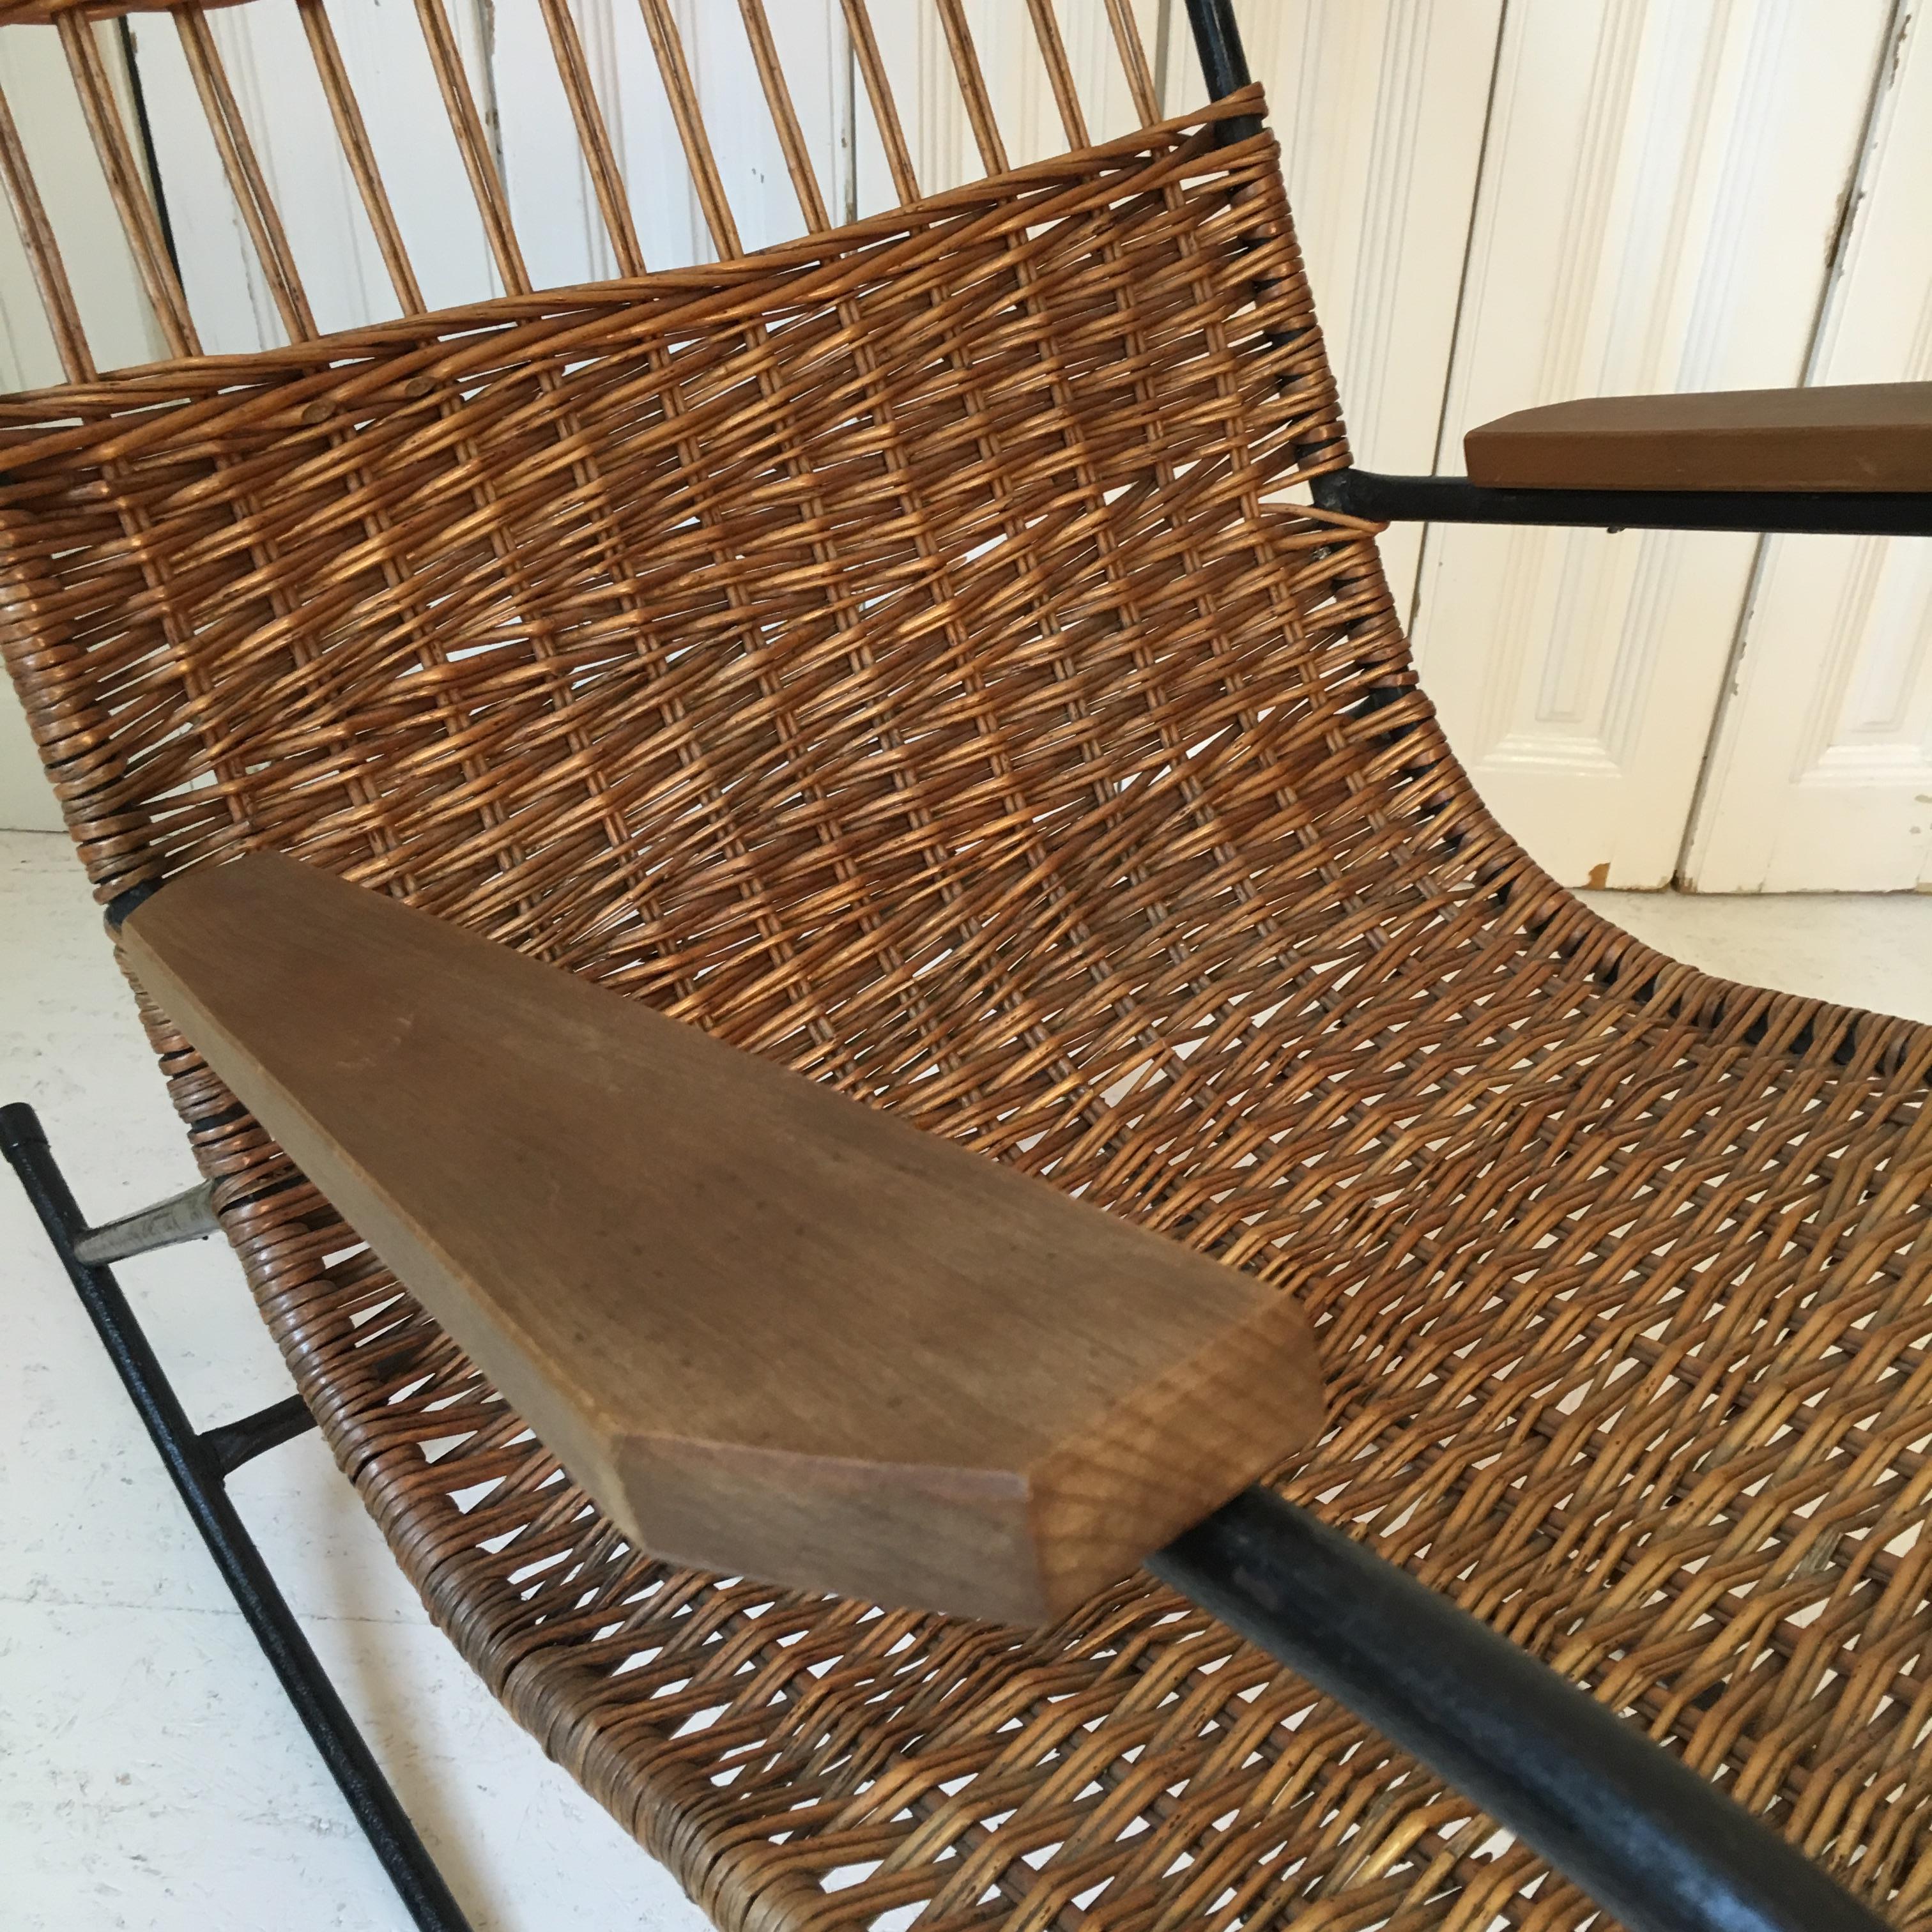 20th Century Industrial Iron & Wicker Rocking Chair with Vintage Linen Cushion, Mid-Century